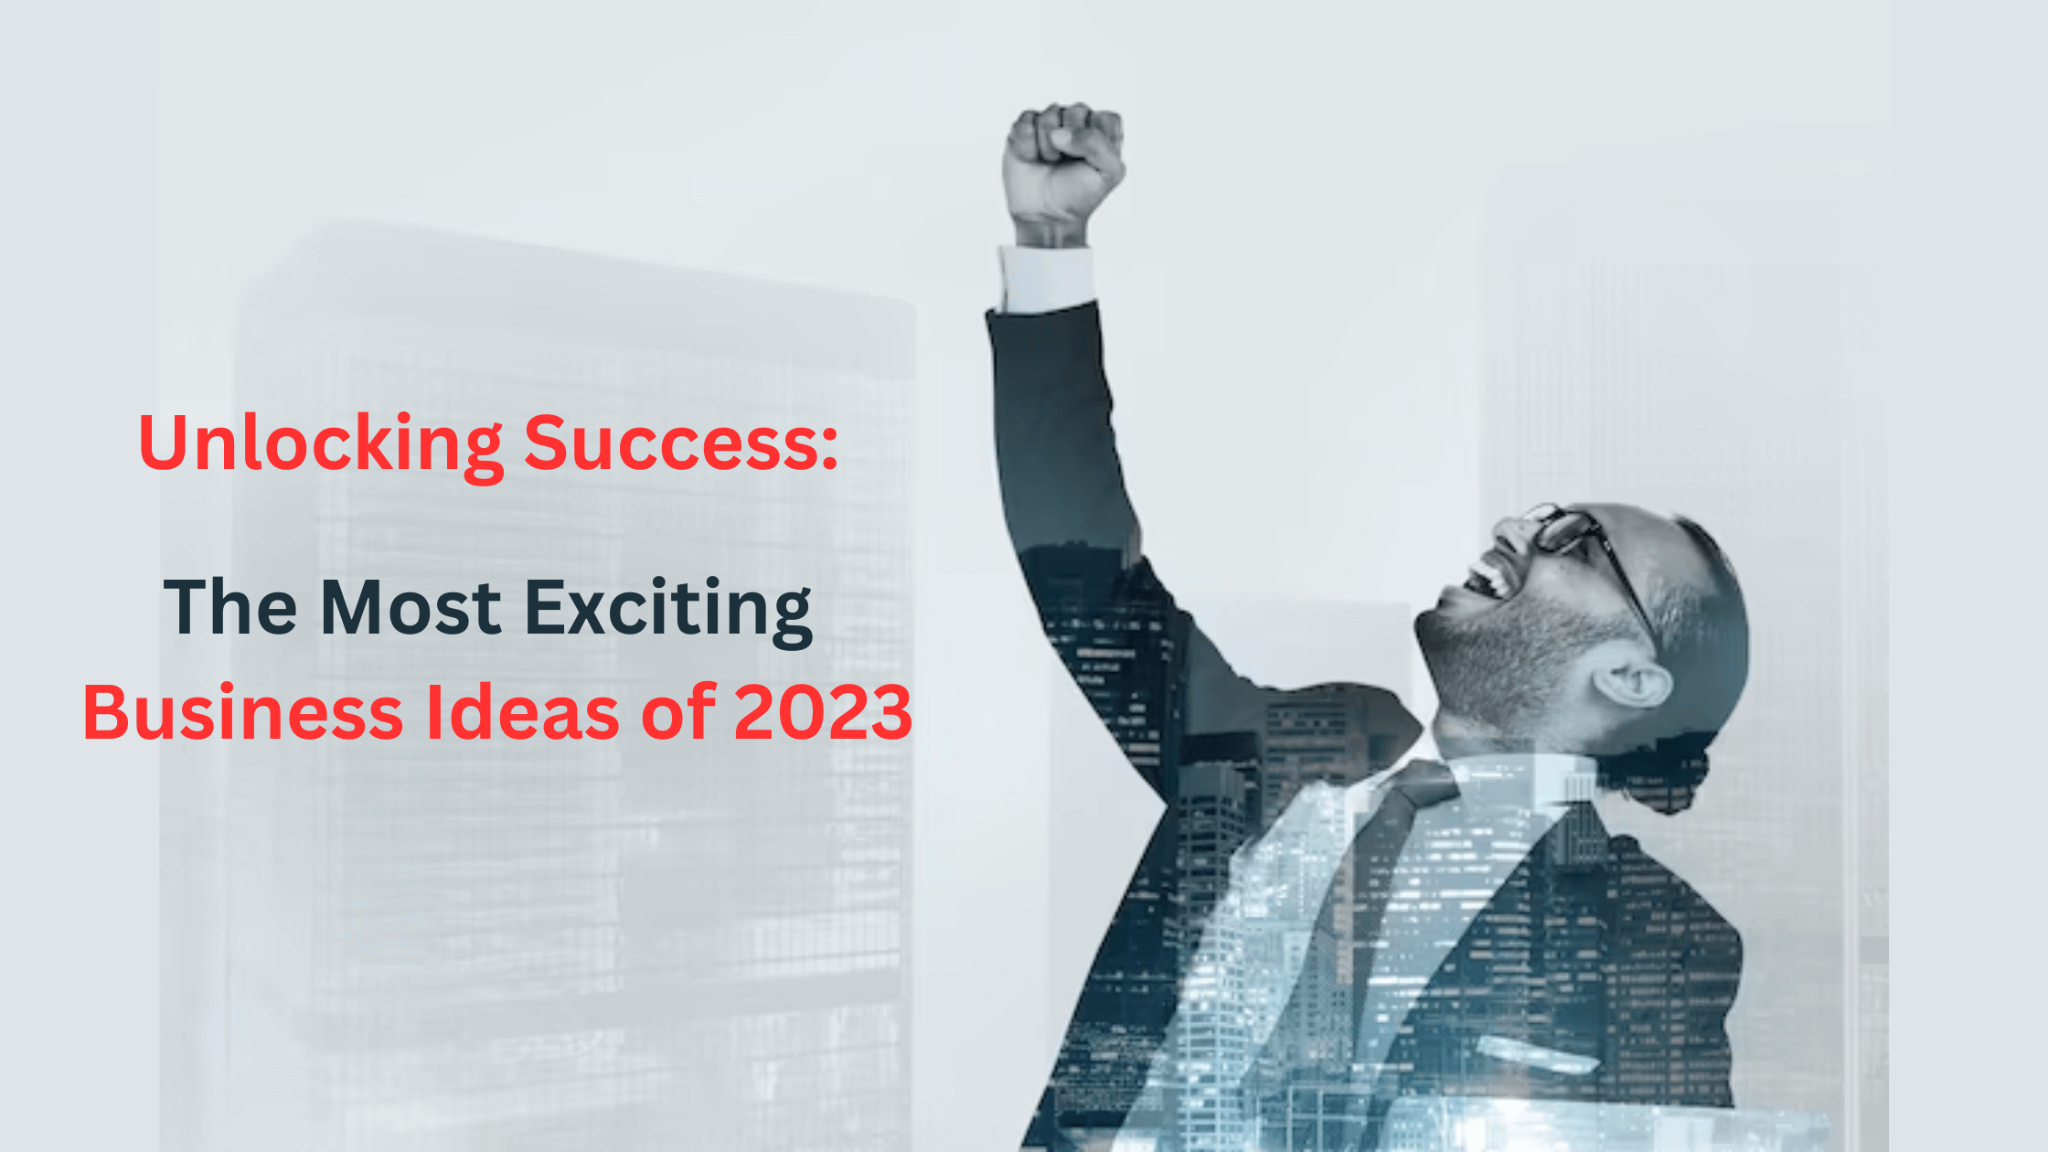 Unlocking Success: The Most Exciting Business Ideas of 2023